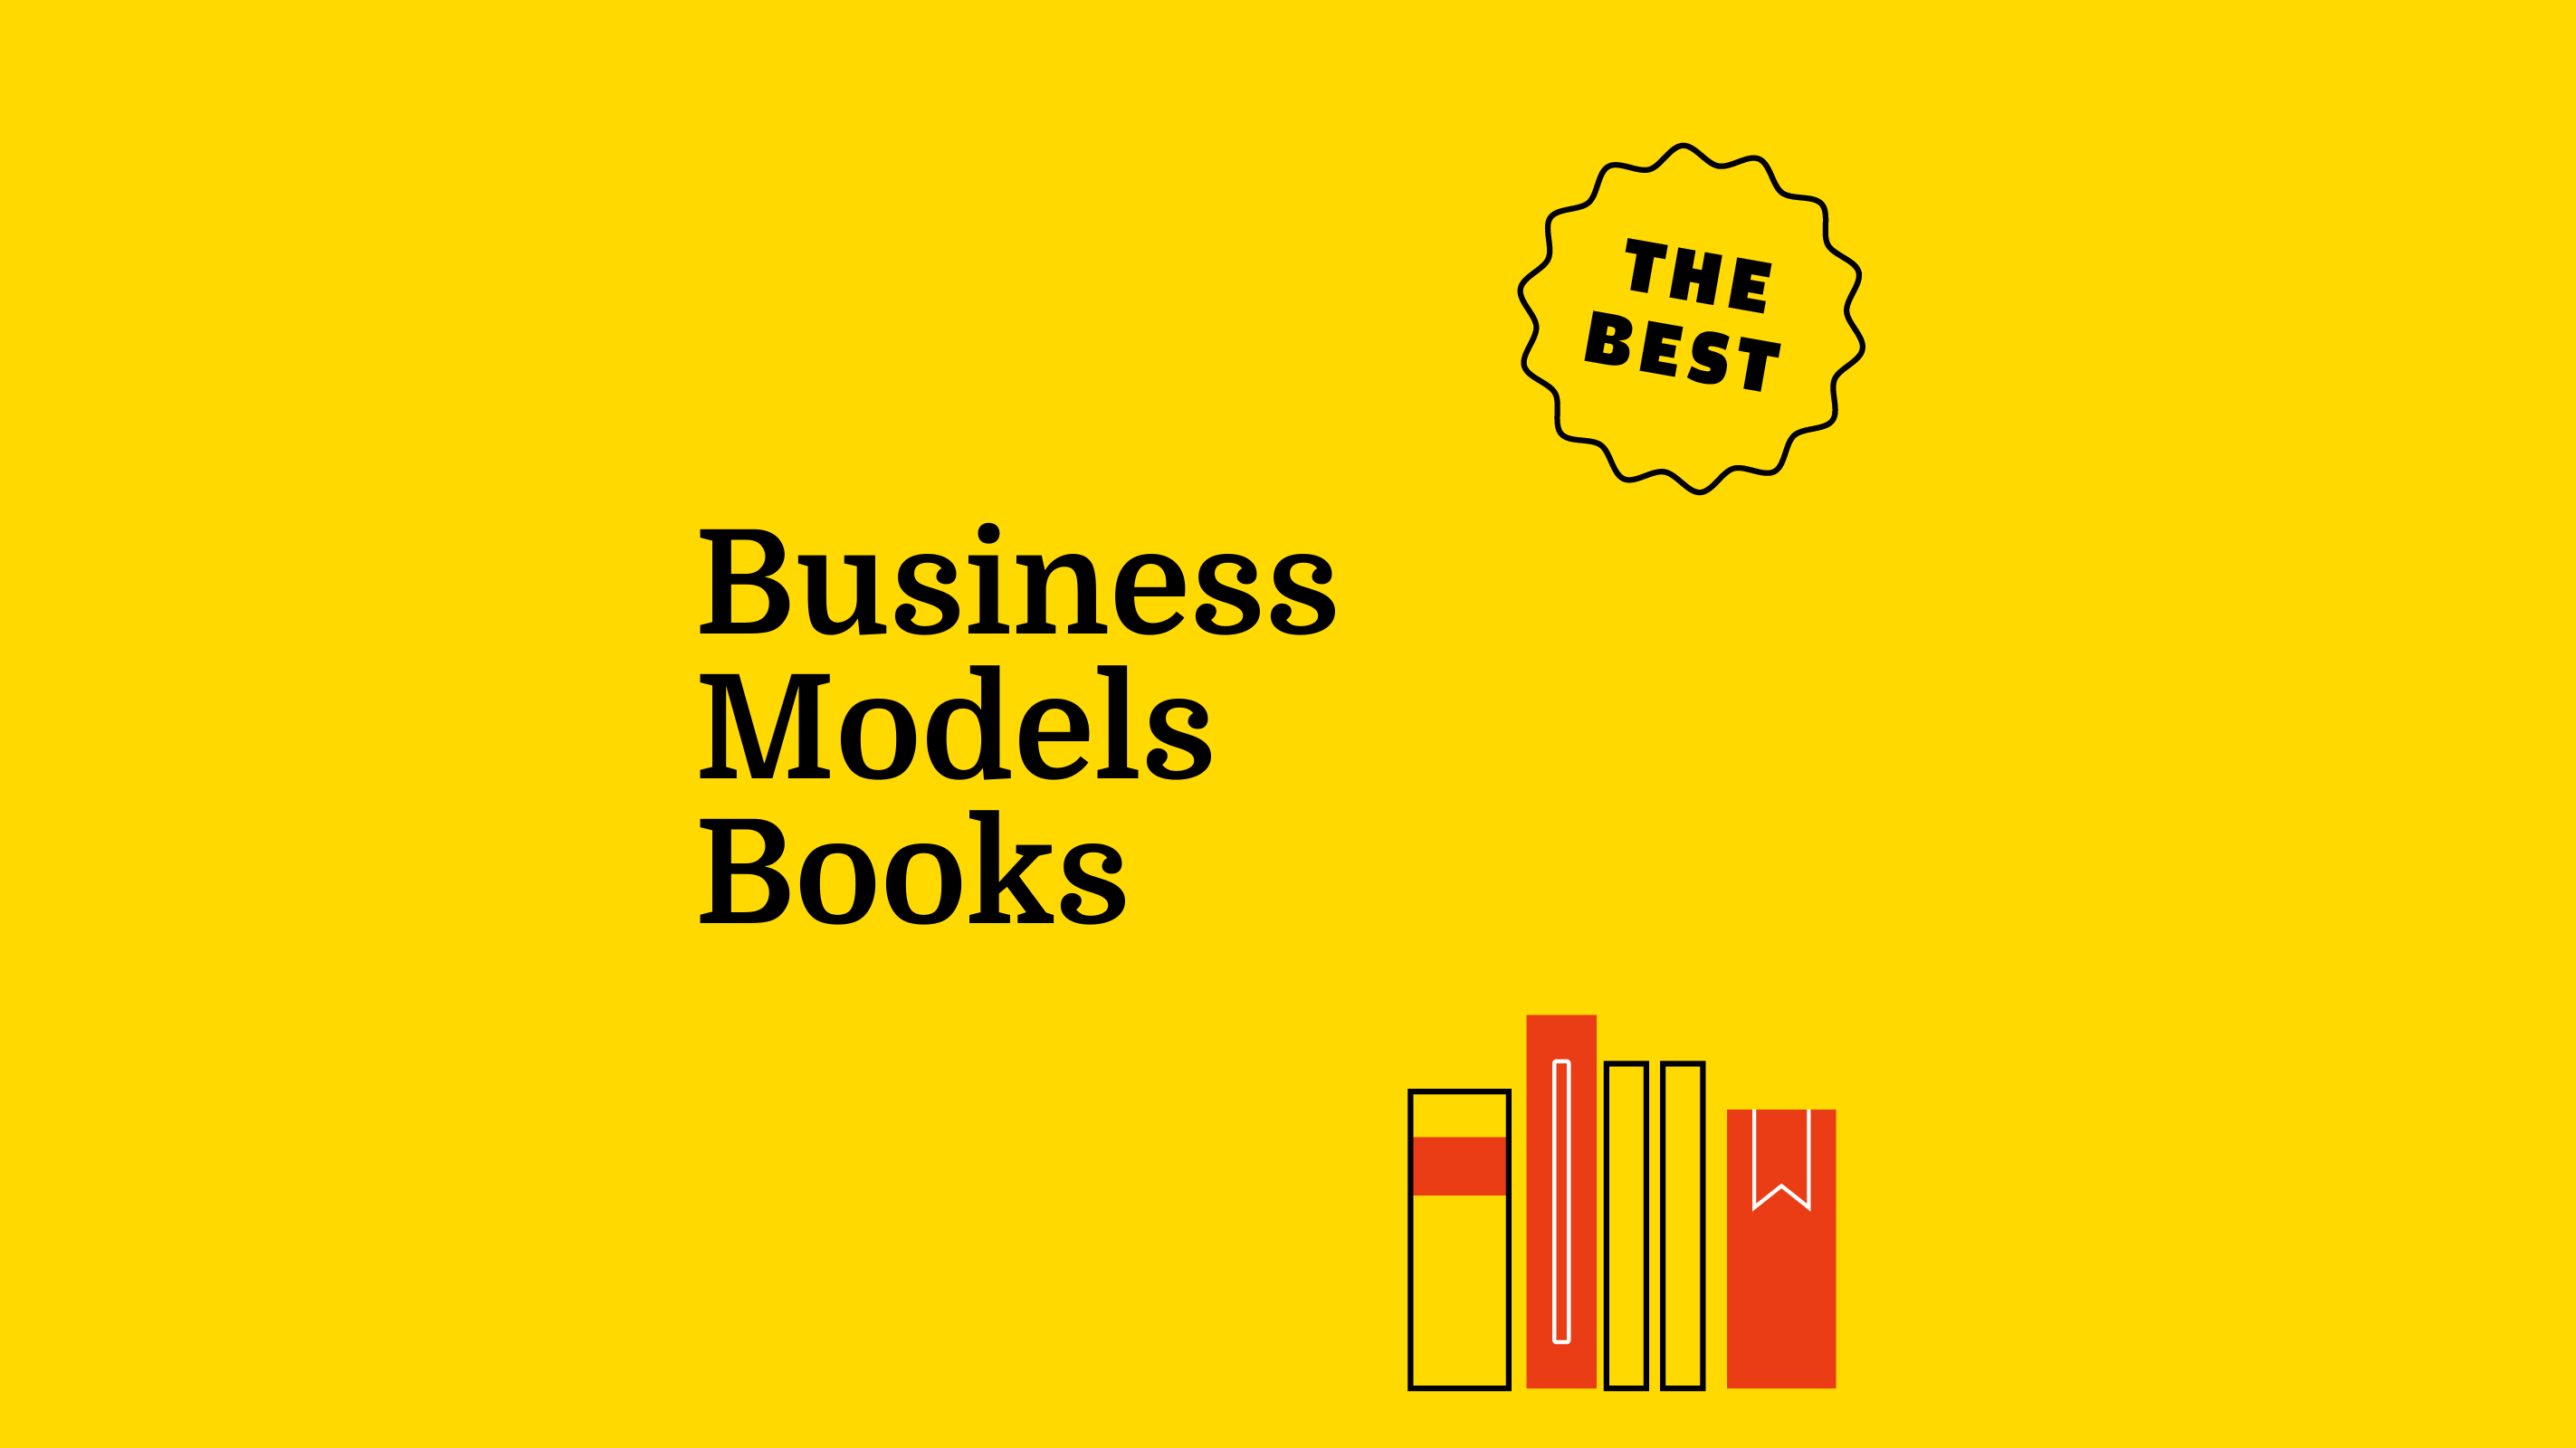 REV-business-models-books-featured-image-3571